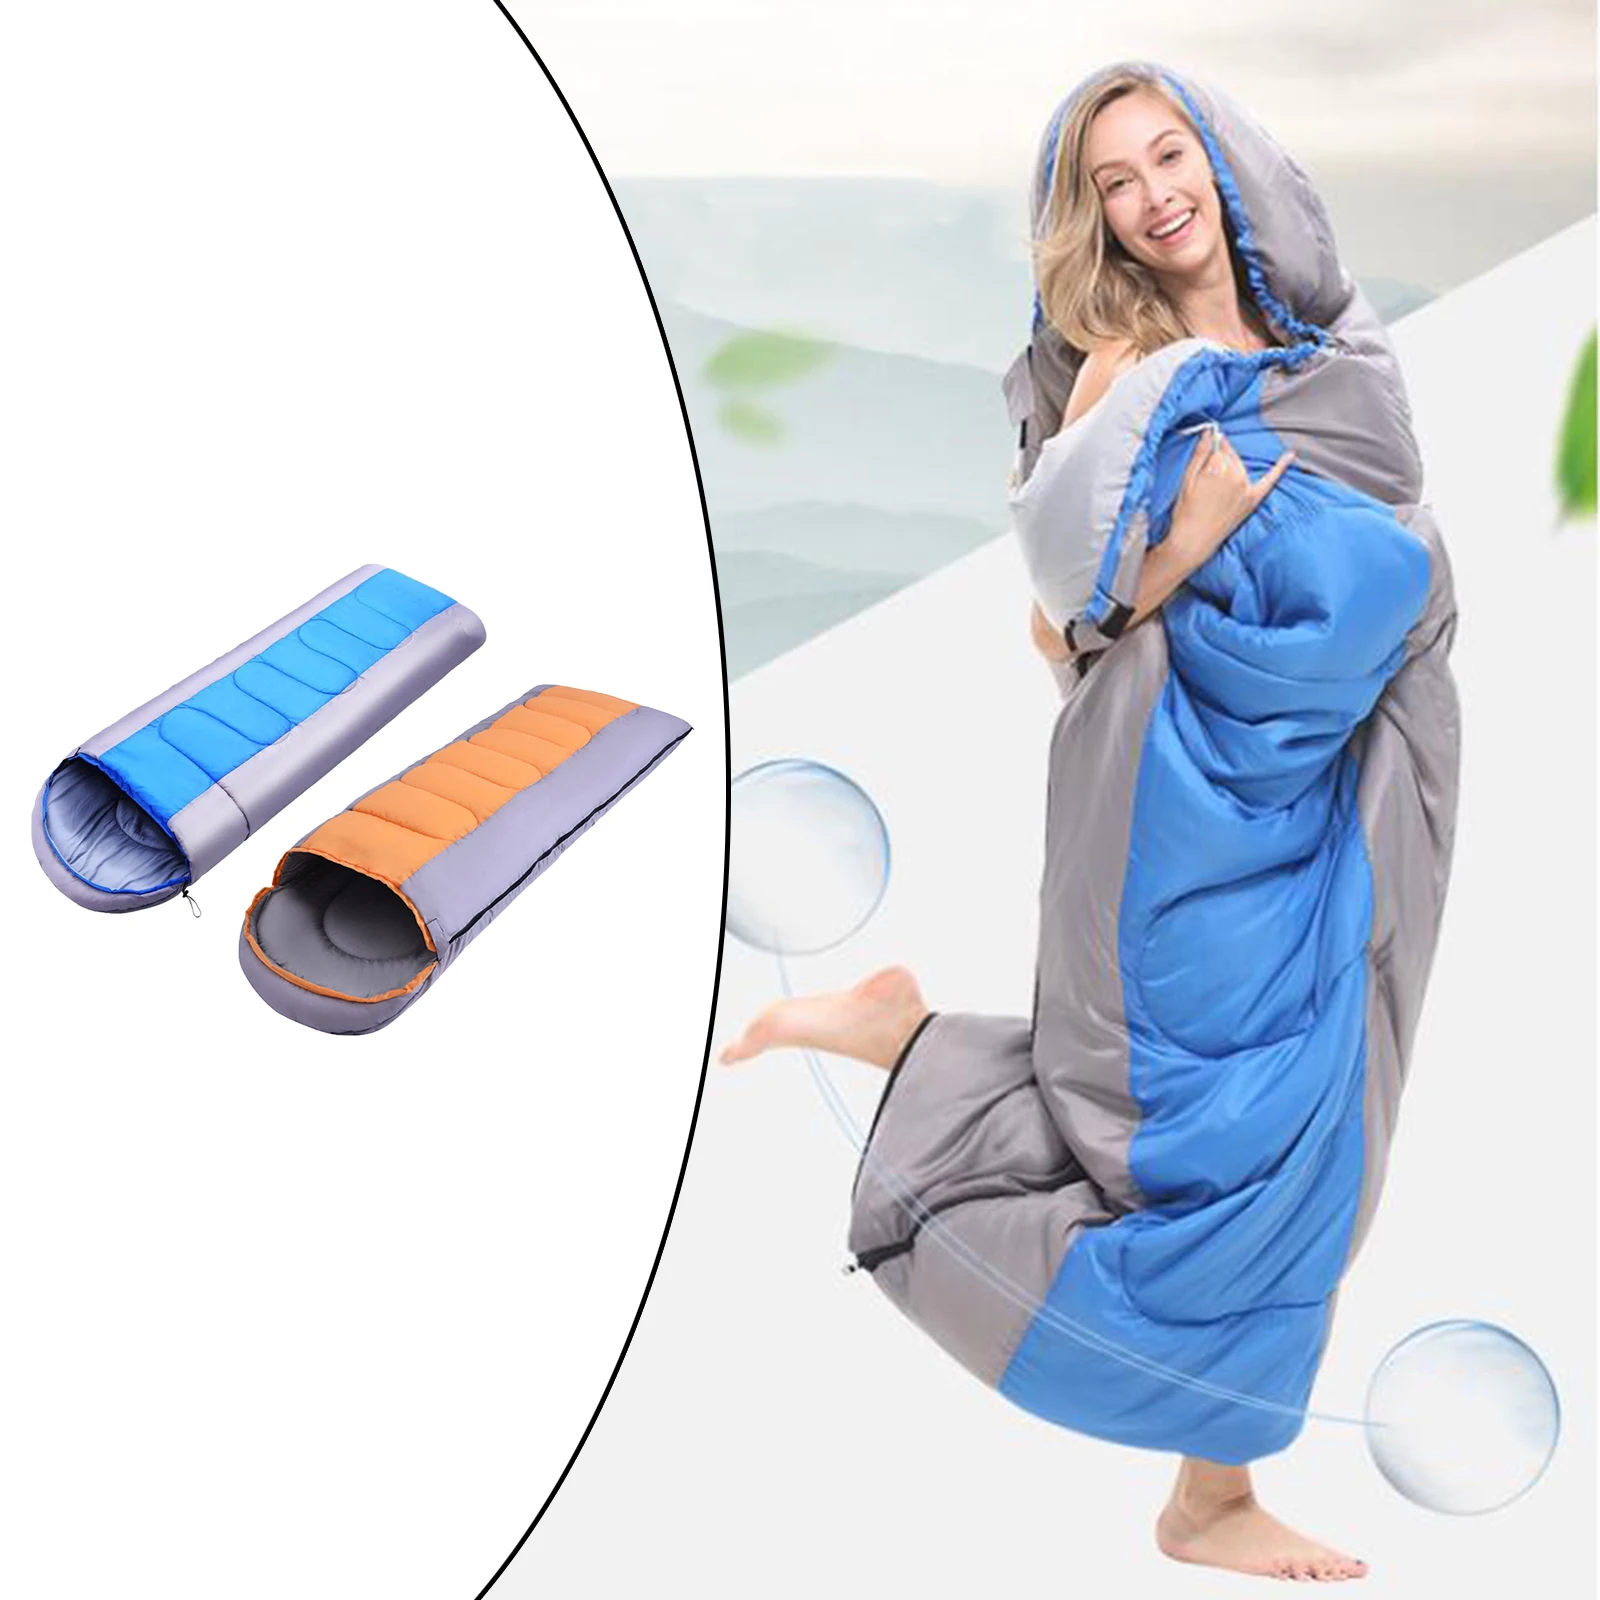 Sleeping Bag Indoor Outdoor Zippered Holes for Feet Compact Wearable Ultralight for Backpacking Women Youth Girls Teens